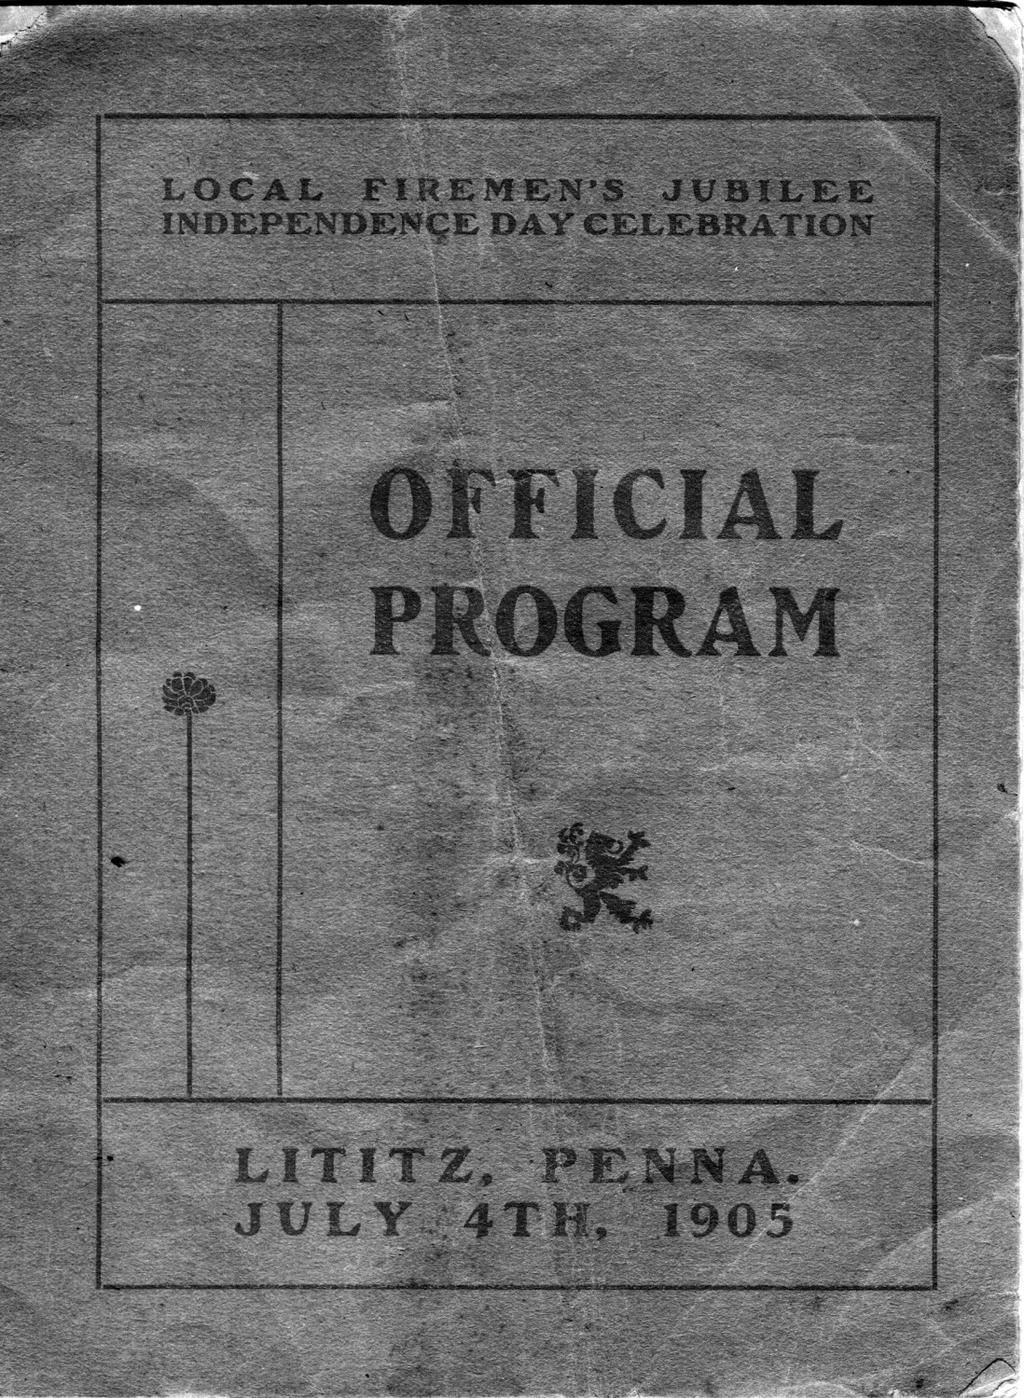 2 Happy 4th of July! Cory Van Brookhoven While going through my grandfather s collection of Lititz memorabilia, I stumbled across this early Lititz 4th of July park program.